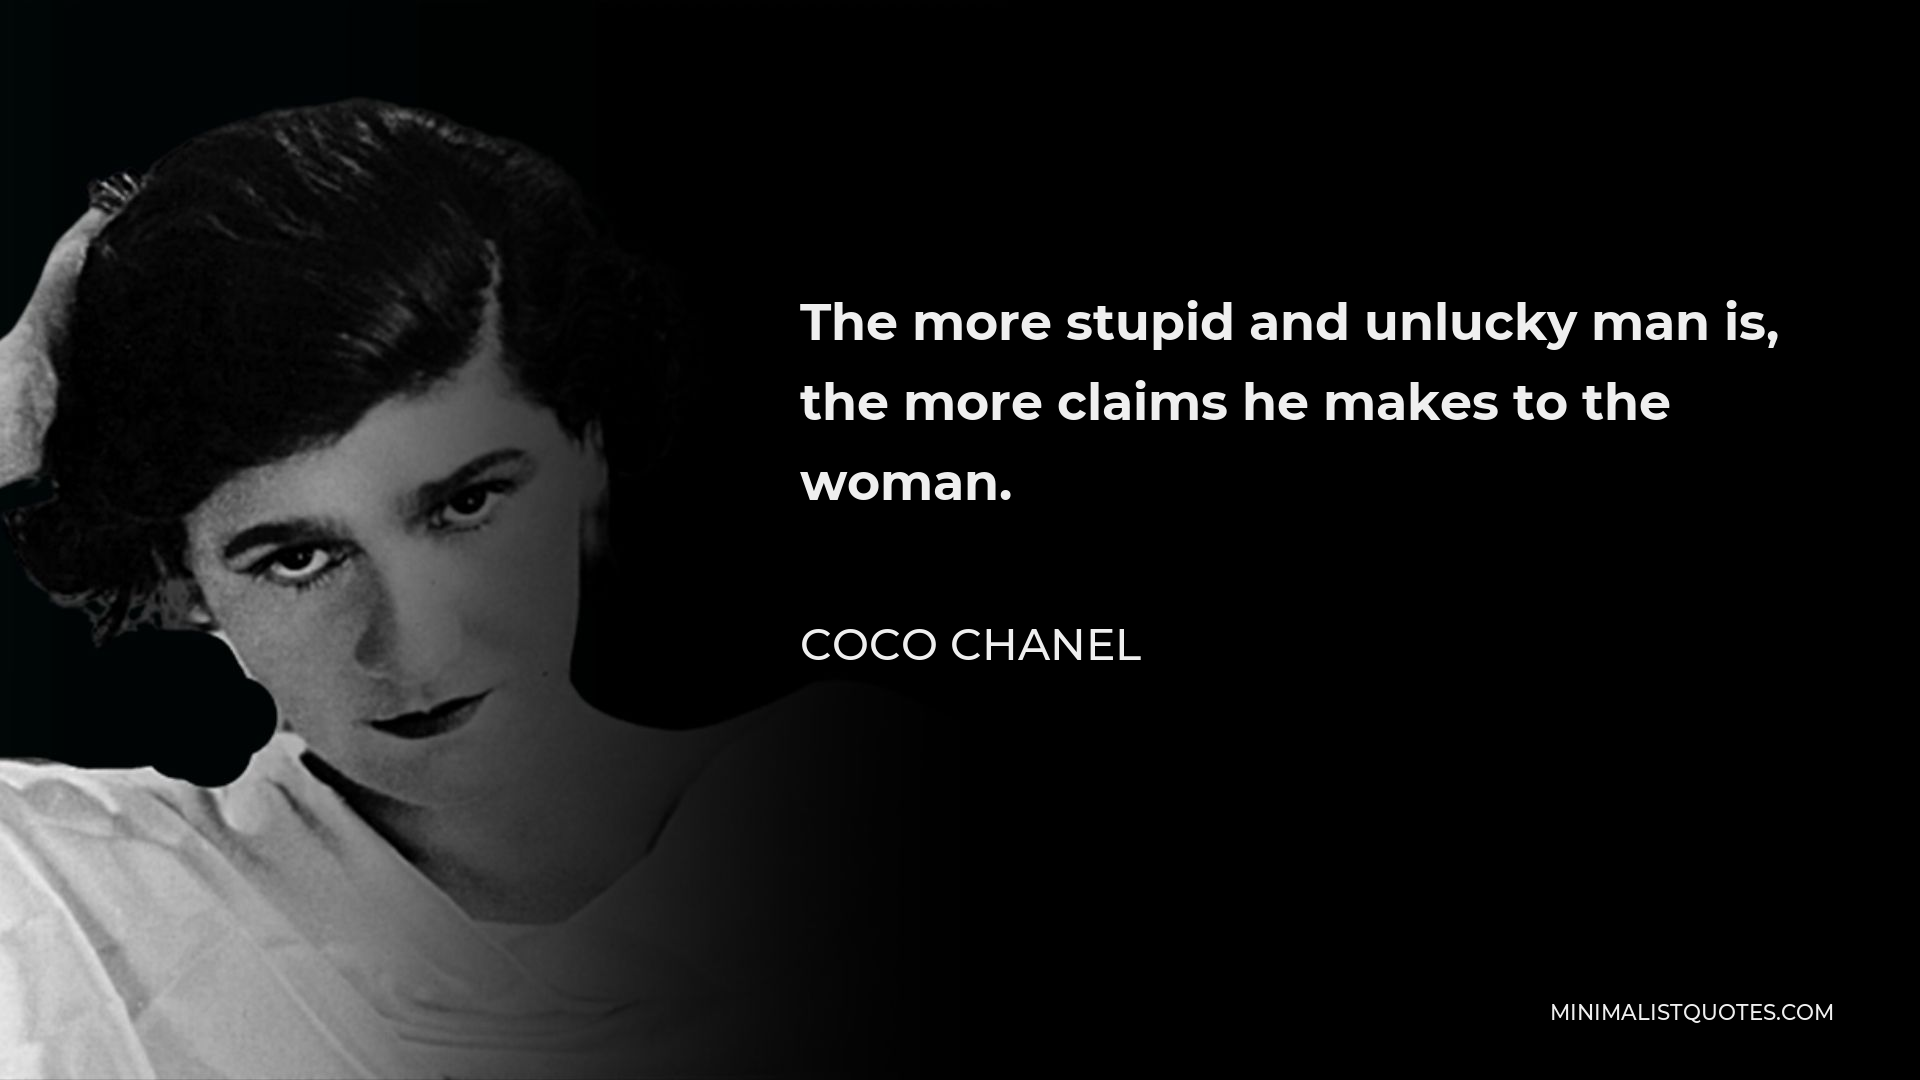 Coco Chanel Quote - The more stupid and unlucky man is, the more claims he makes to the woman.